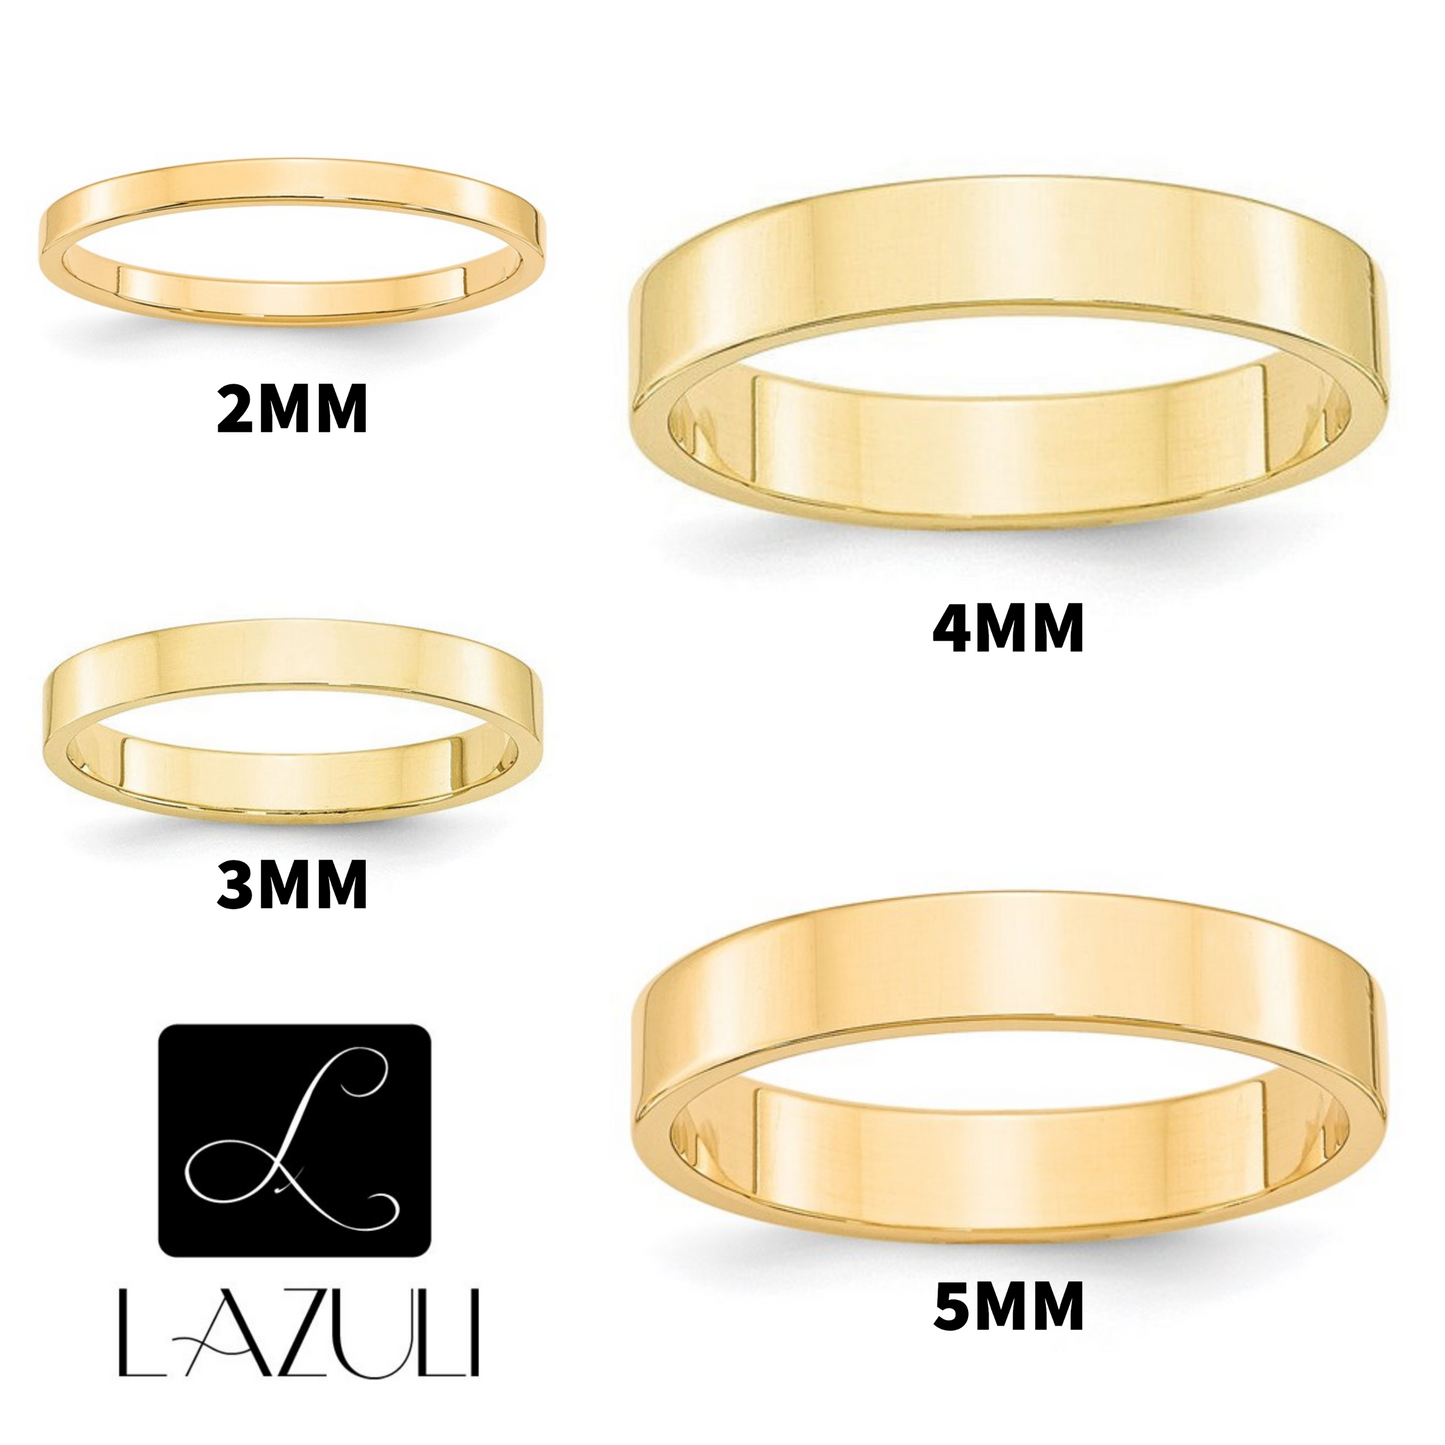 10K Yellow Gold 2mm 3mm 4mm 5mm Wide Flat Men's and Women's Wedding Band Ring. Anniversary Engagement Cigar Band Rings Thumb rings